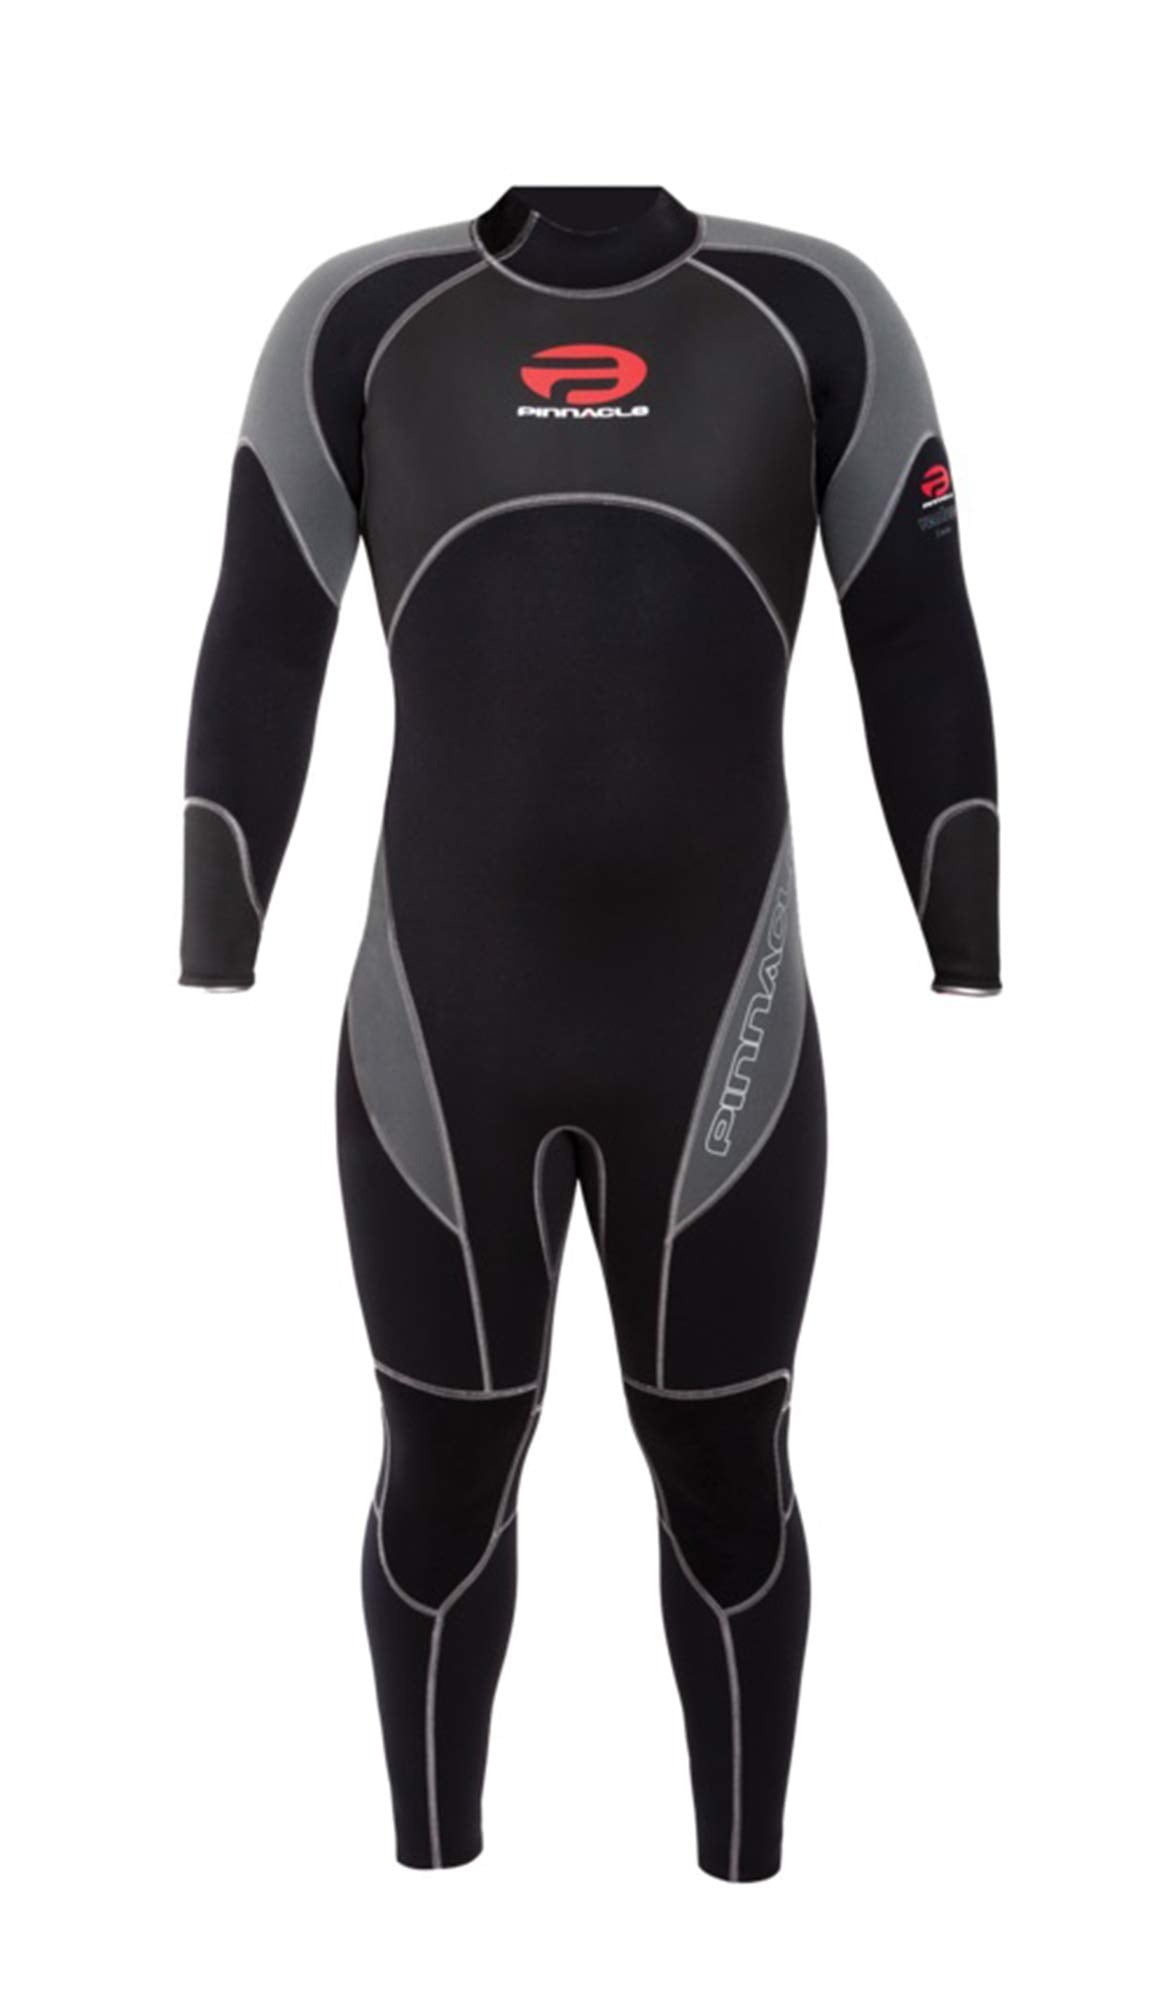 Pinnacle Aquatics Small Venture 3mm Womens Wetsuit Female WS13FWR12 for sale online 